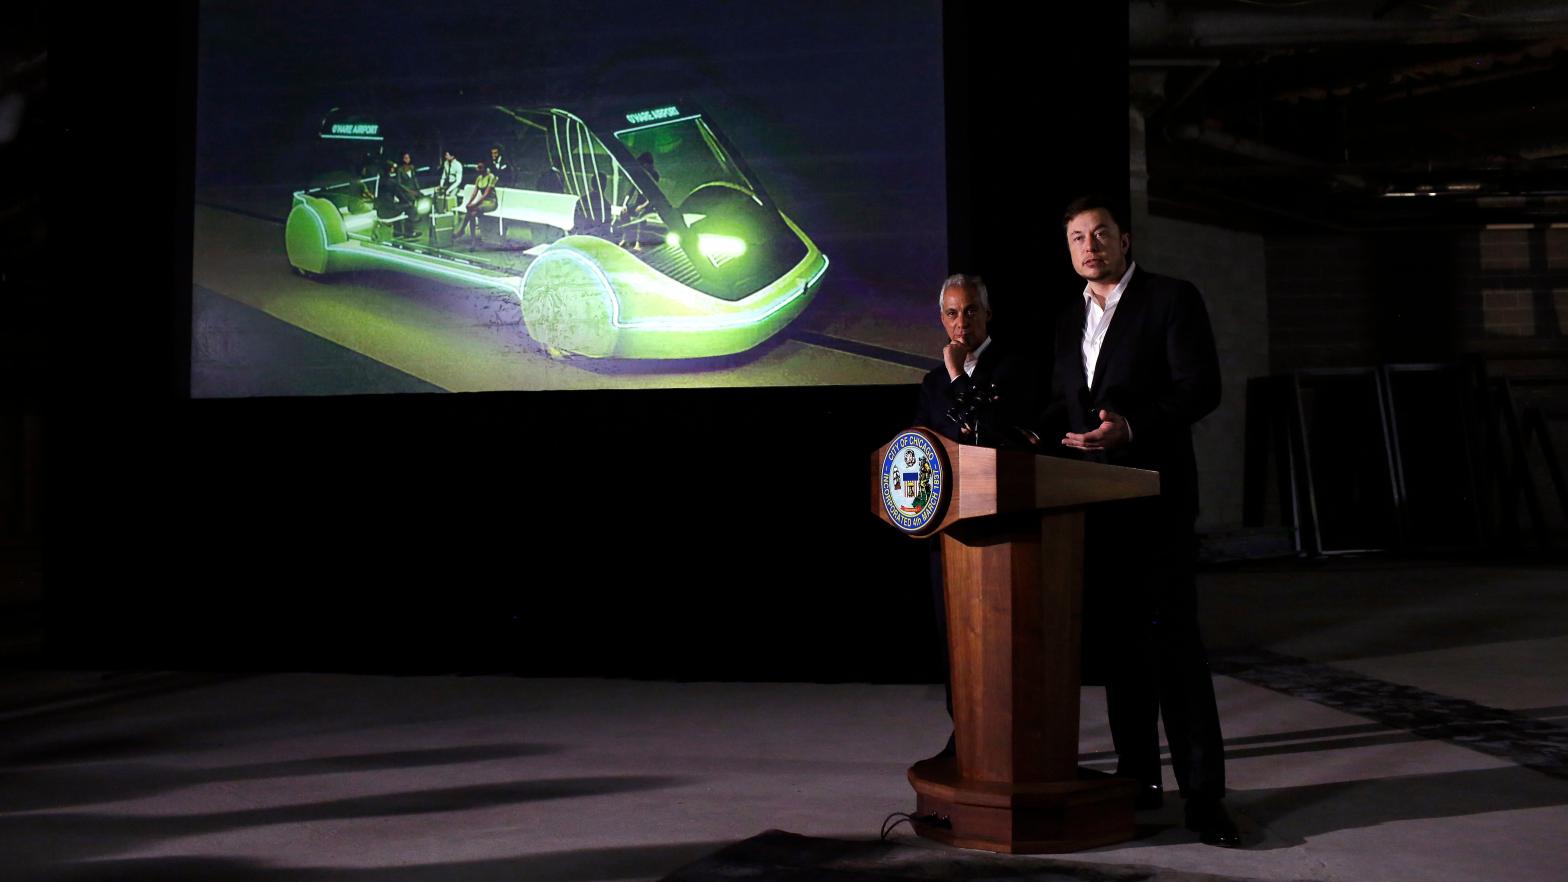 Chicago Mayor Rahm Emanuel and Elon Musk in Chicago announcing a new 16-passenger transportation system in Chicago on June 14, 2018. It never happened. (Photo: Joshua Lott, Getty Images)